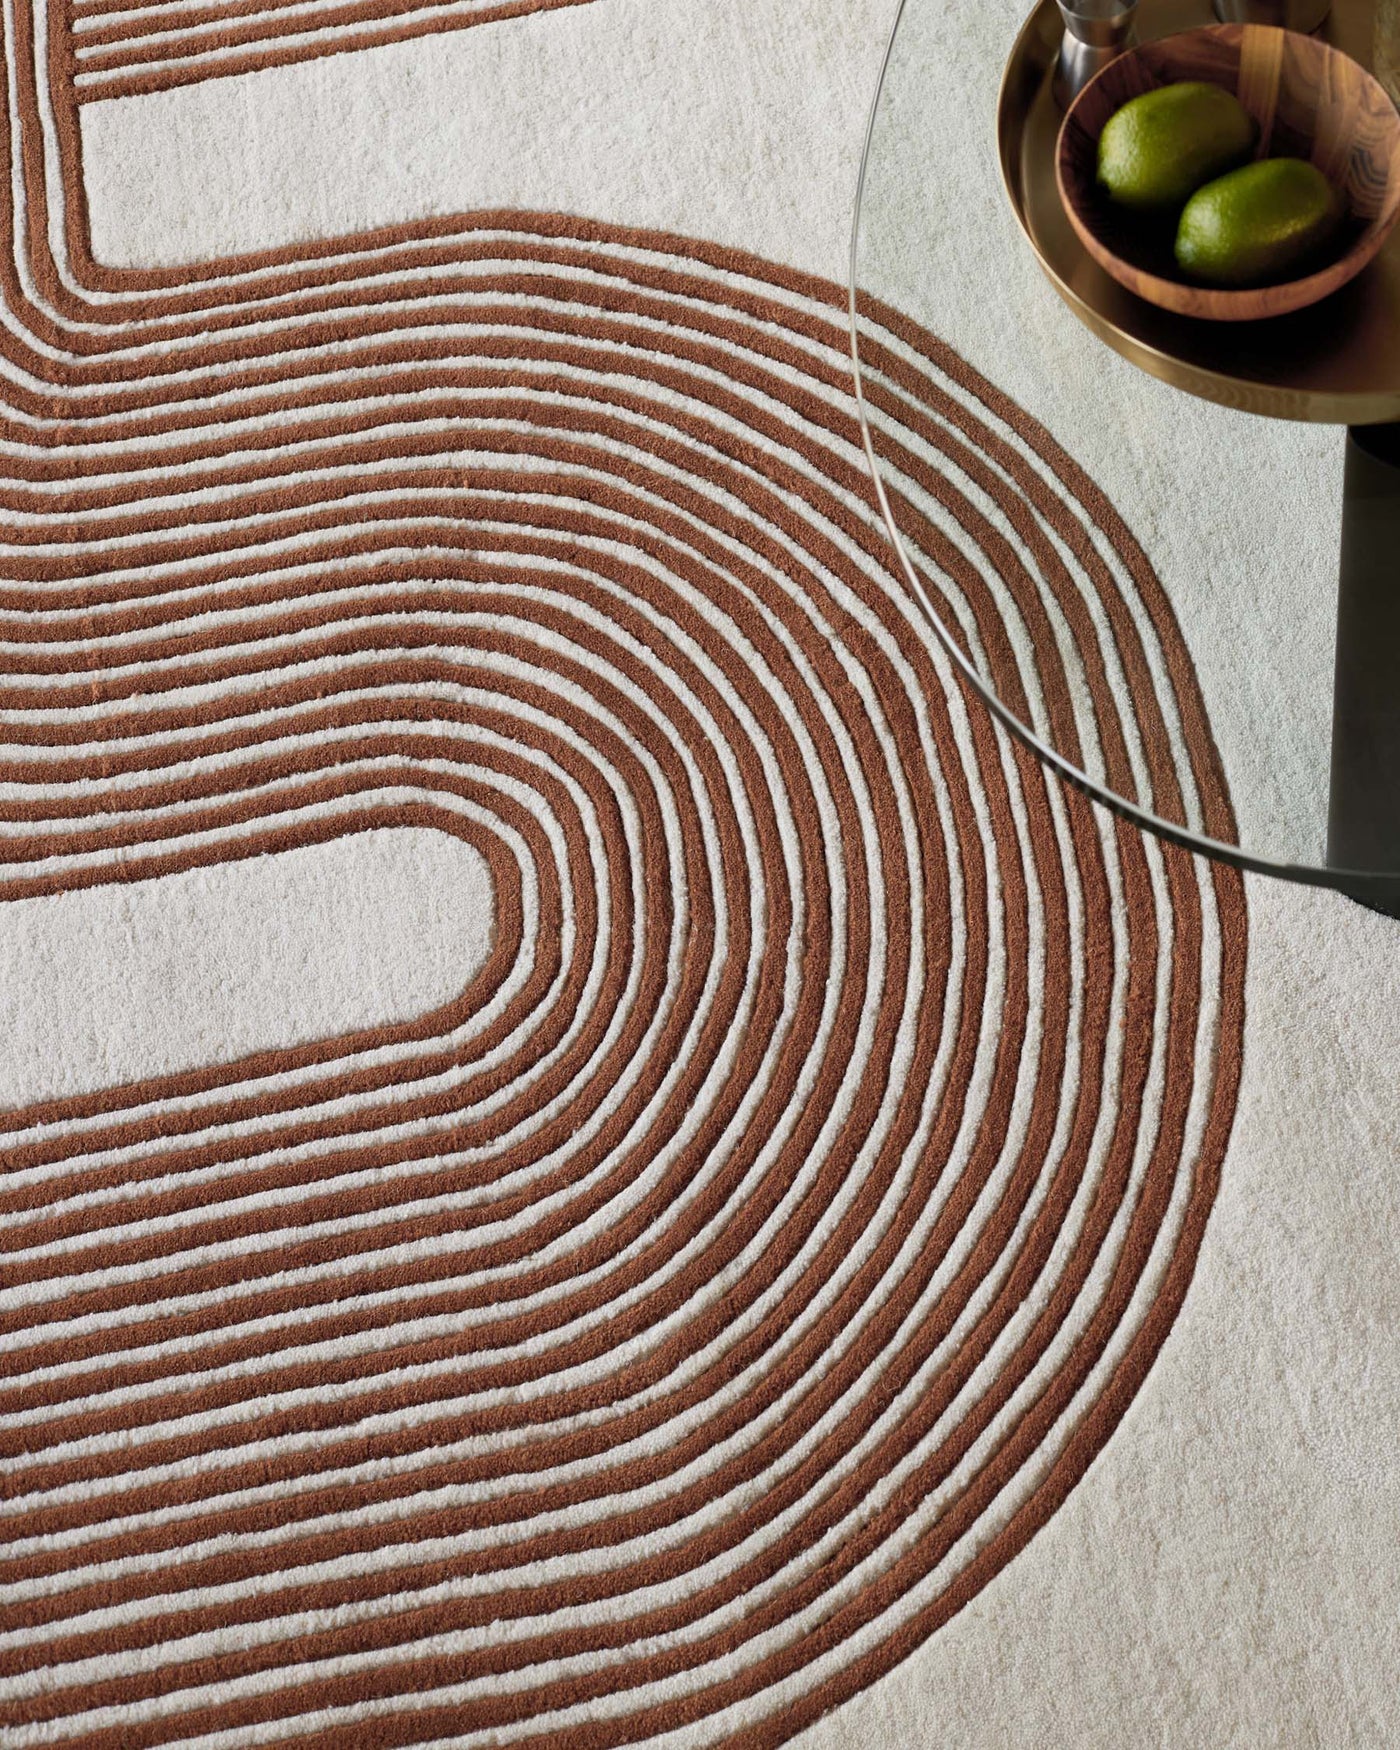 Abstract design area rug with concentric circle pattern in brown and beige, partially under a minimalist glass side table with a round, wooden bowl containing two green limes on top.